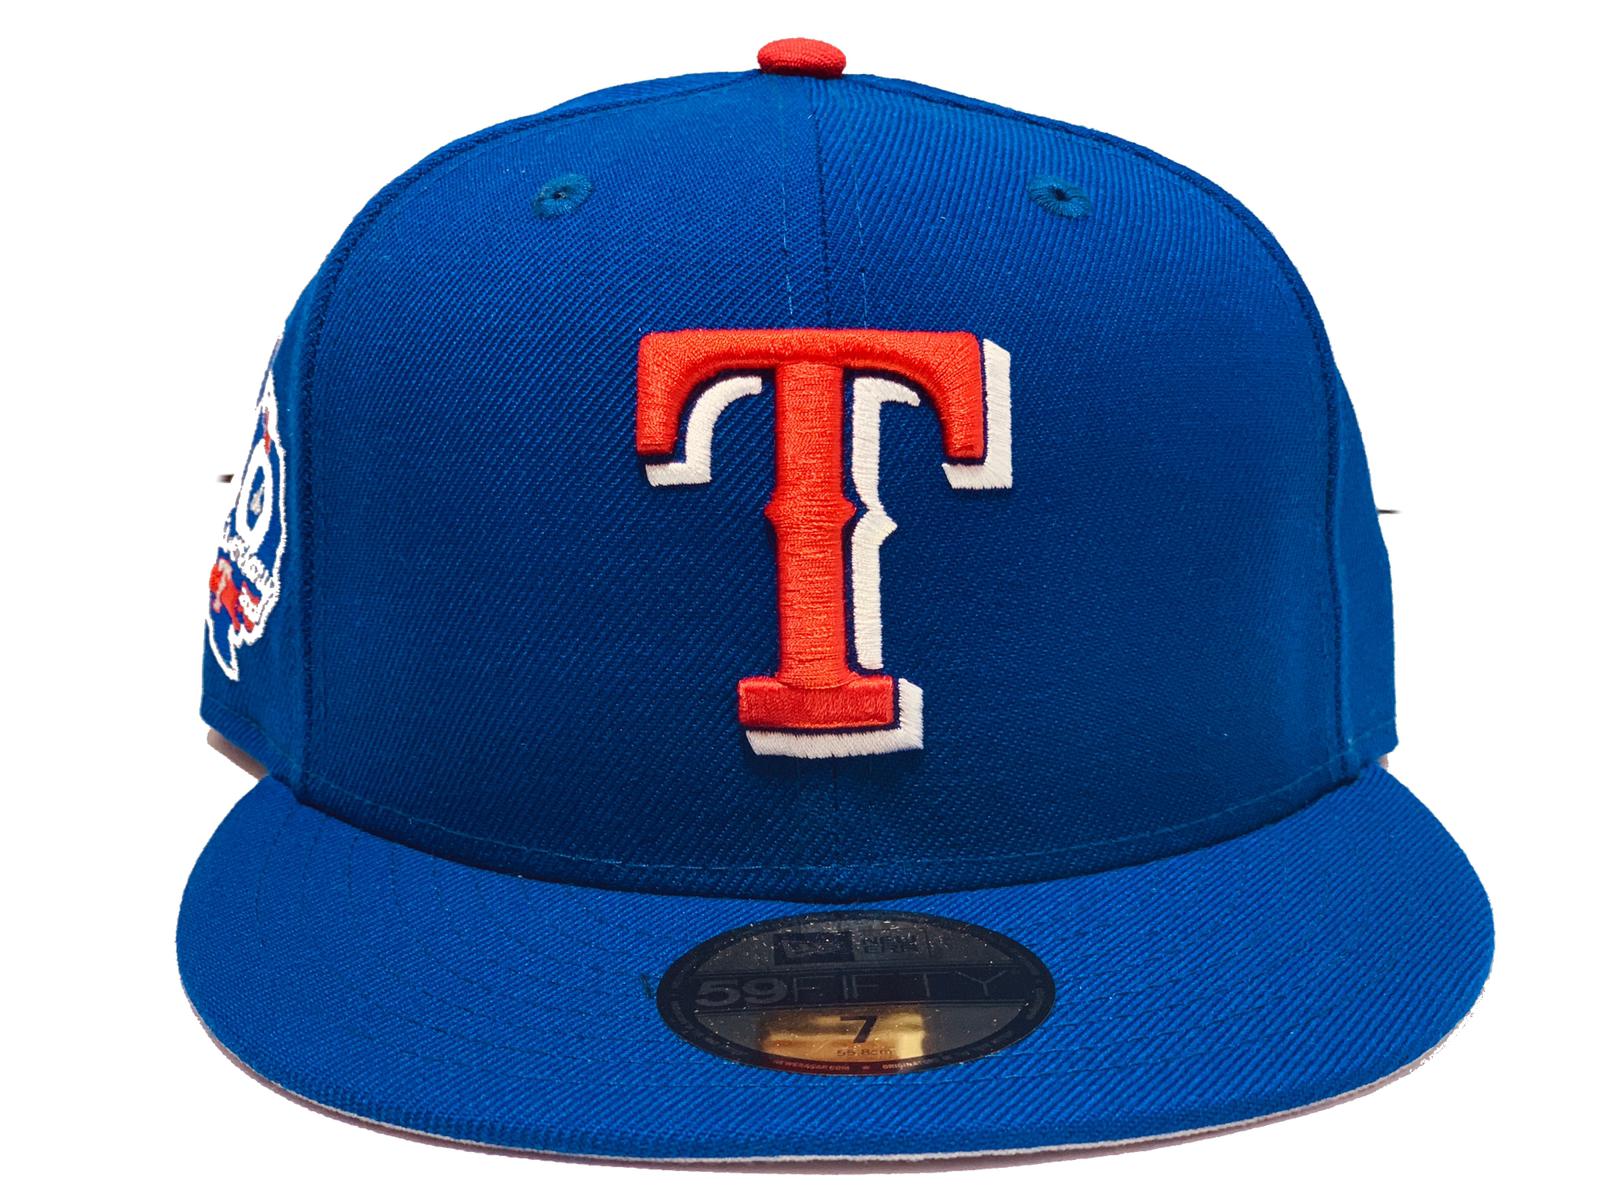 Texas Rangers Pro Standard 40th Anniversary Cooperstown Collection